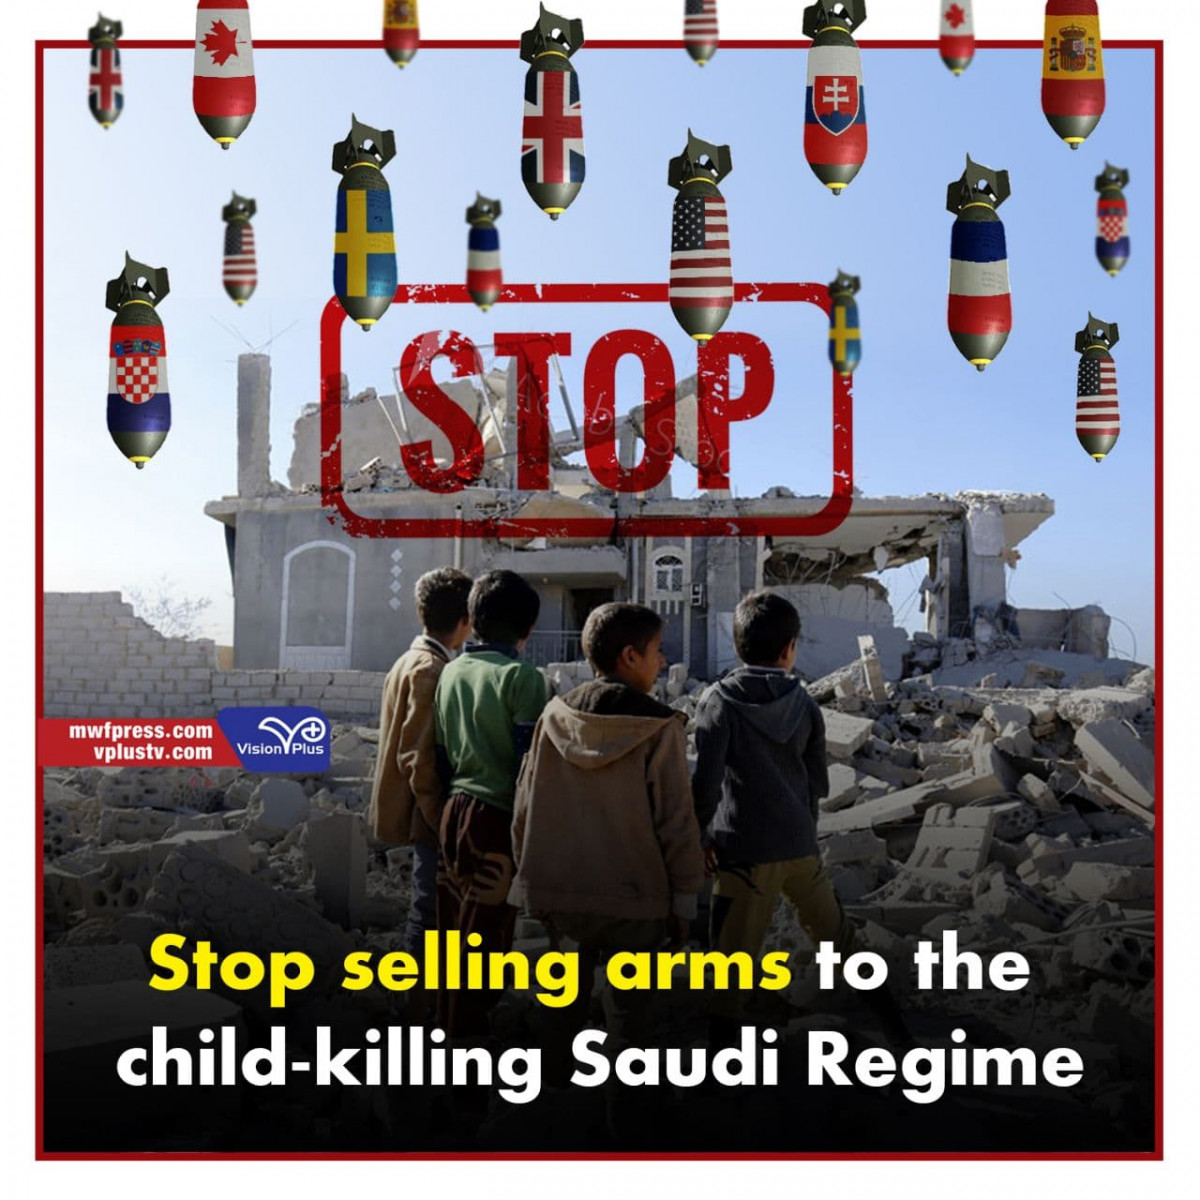 Stop selling arms to the child-killing Saudi Regime